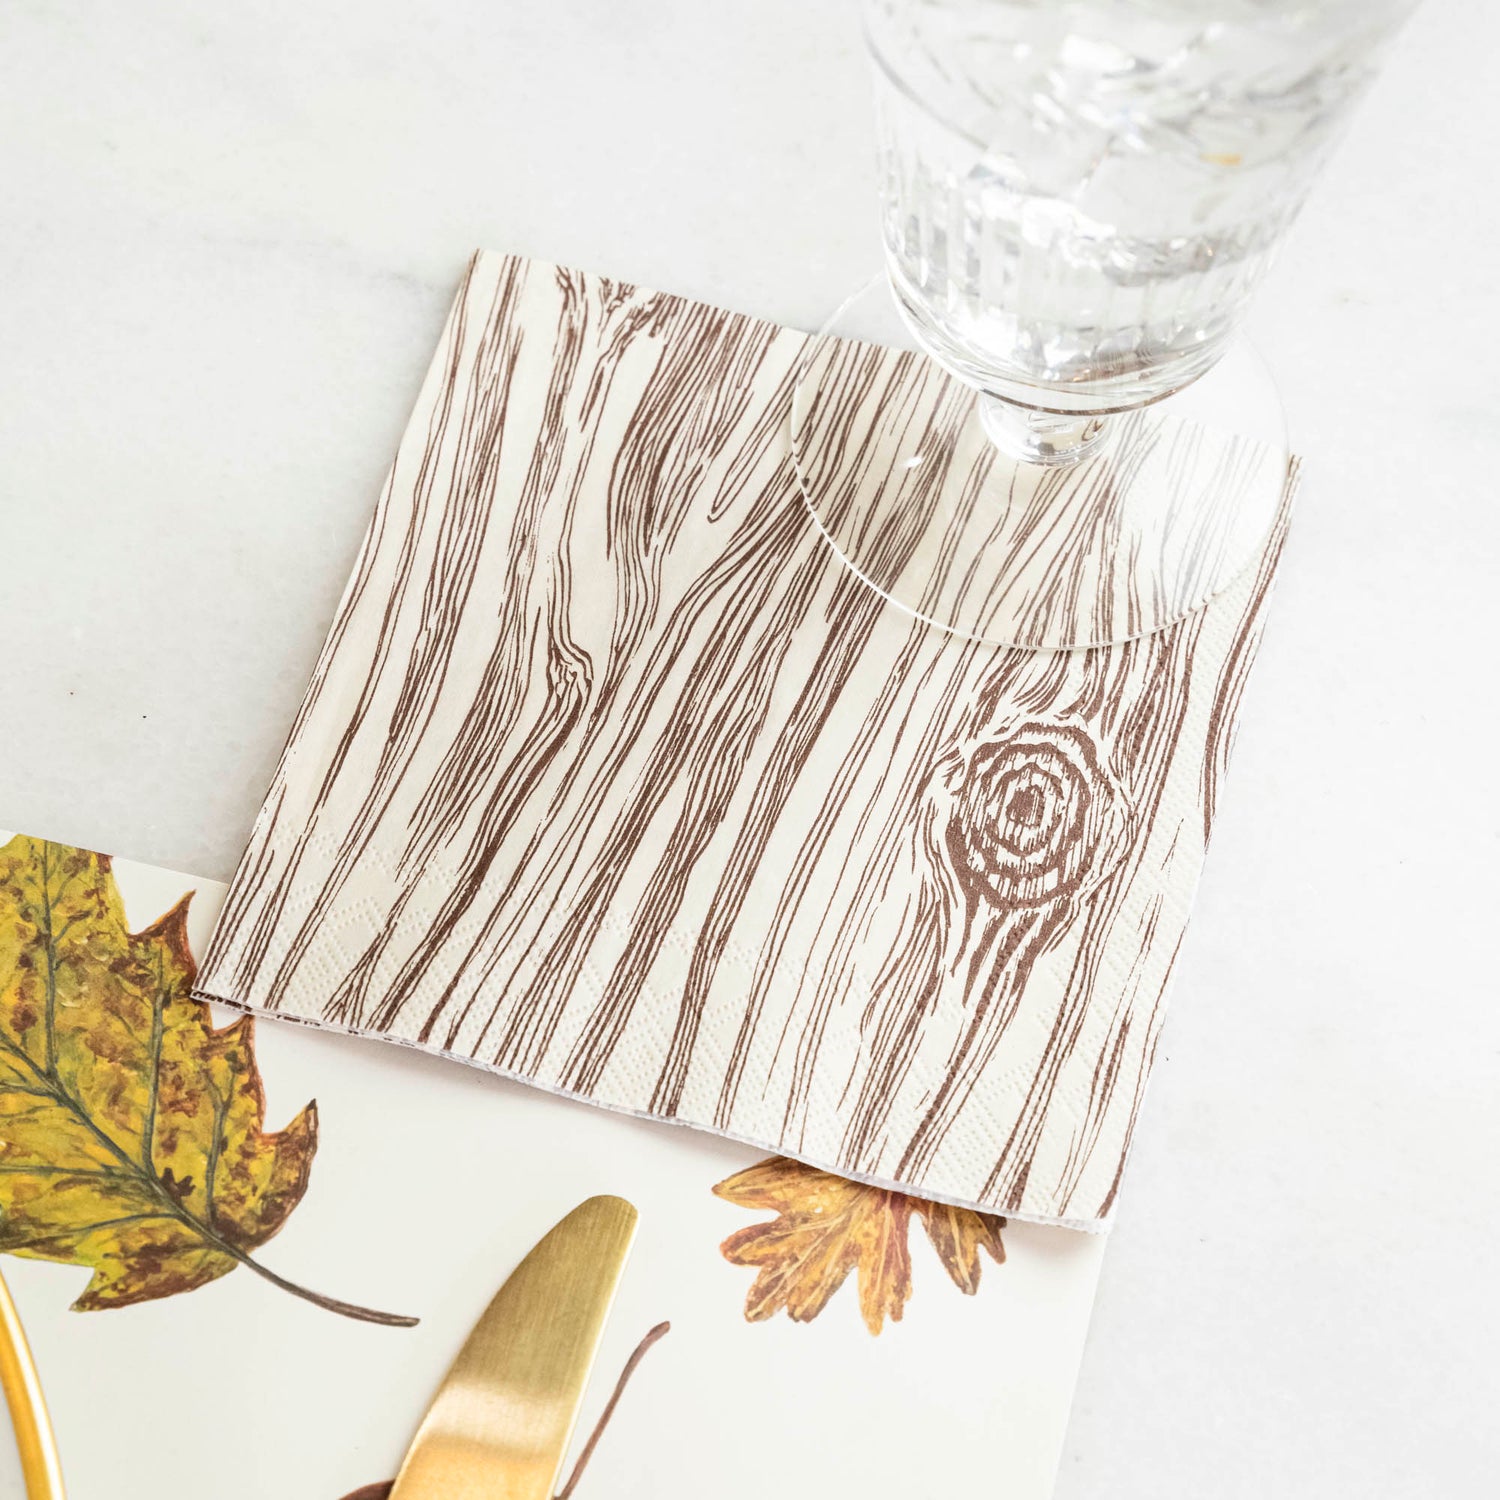 An Oak Cocktail Napkin under a water glass in a fall-themed place setting.